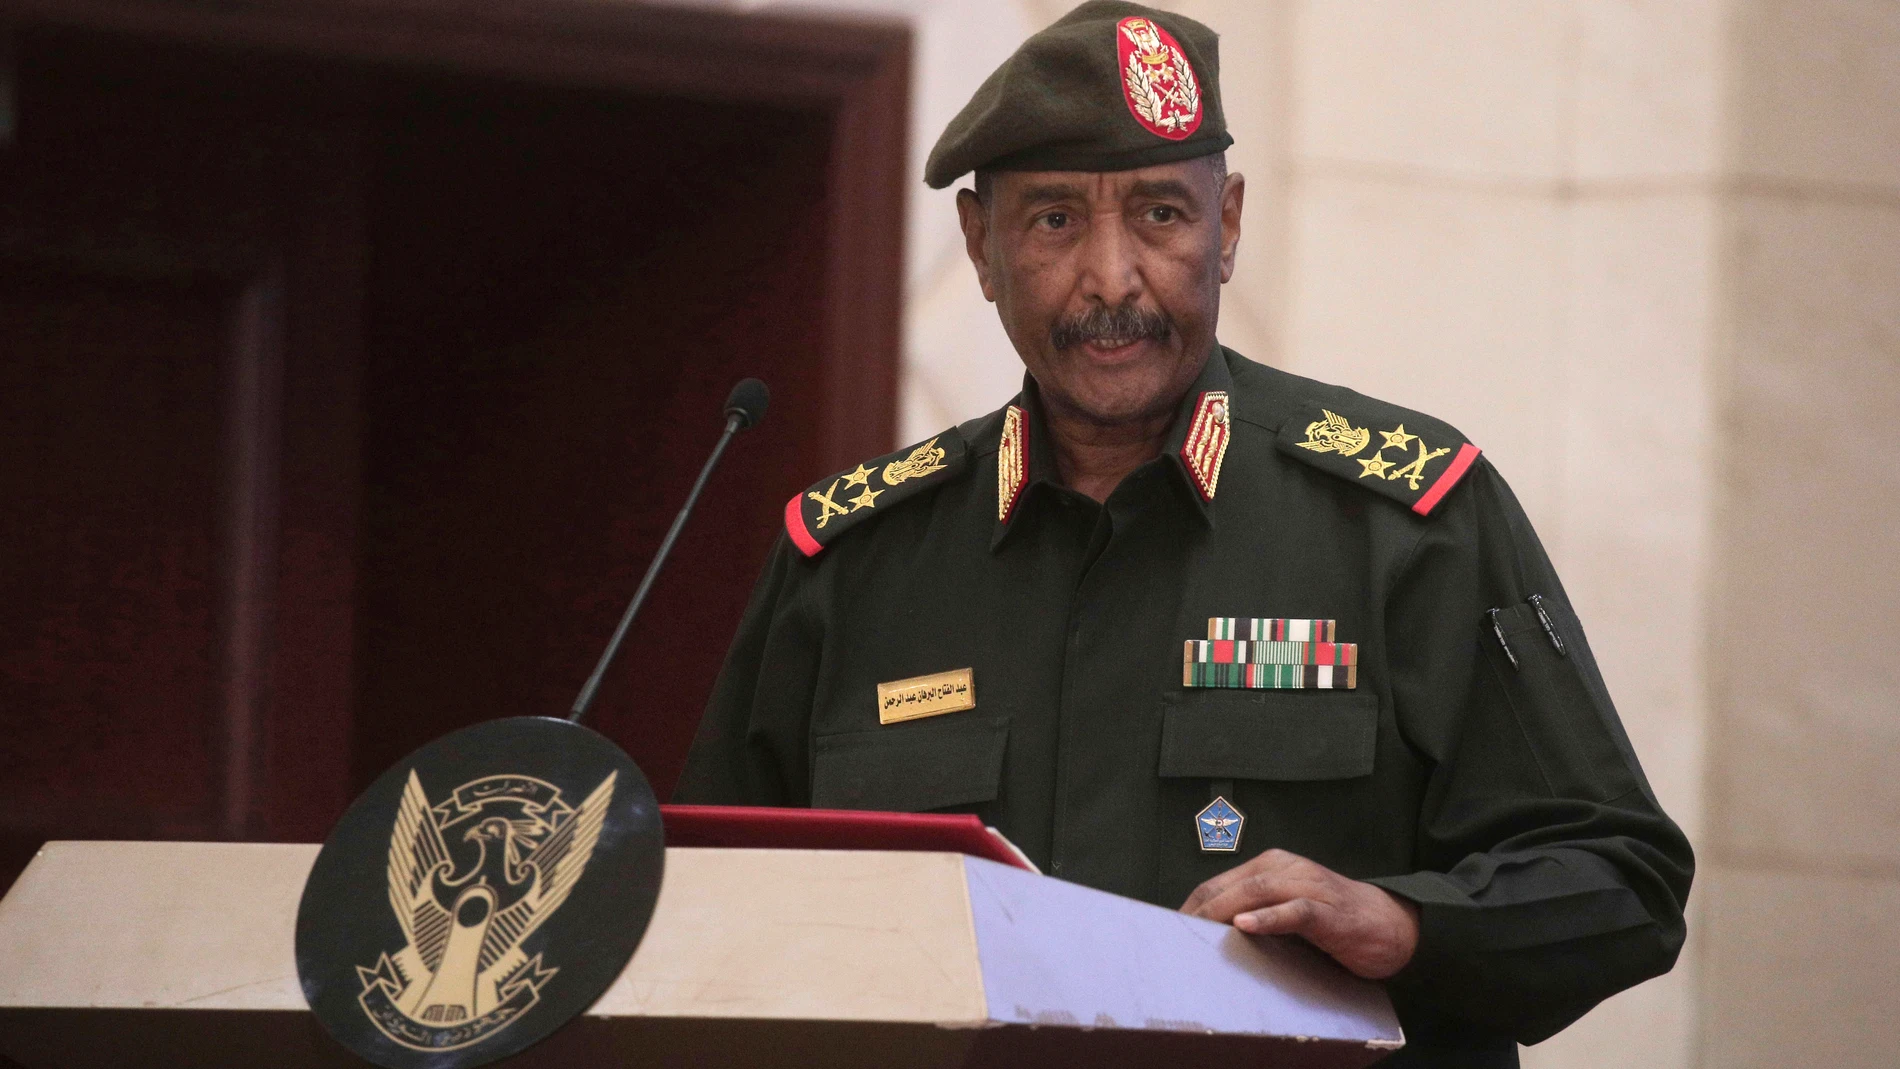 FILE - Sudan's Army chief Gen. Abdel-Fattah Burhan speaks following the signature of an initial deal aimed at ending a deep crisis caused by last year's military coup, in Khartoum, Sudan, on Dec. 5, 2022. The head of Sudan’s army warned Thursday Aug. 31, 2023 that the northeast African country will be divided if the conflict between the military and rival paramilitary force is not resolved. (AP Photo/Marwan Ali, File)